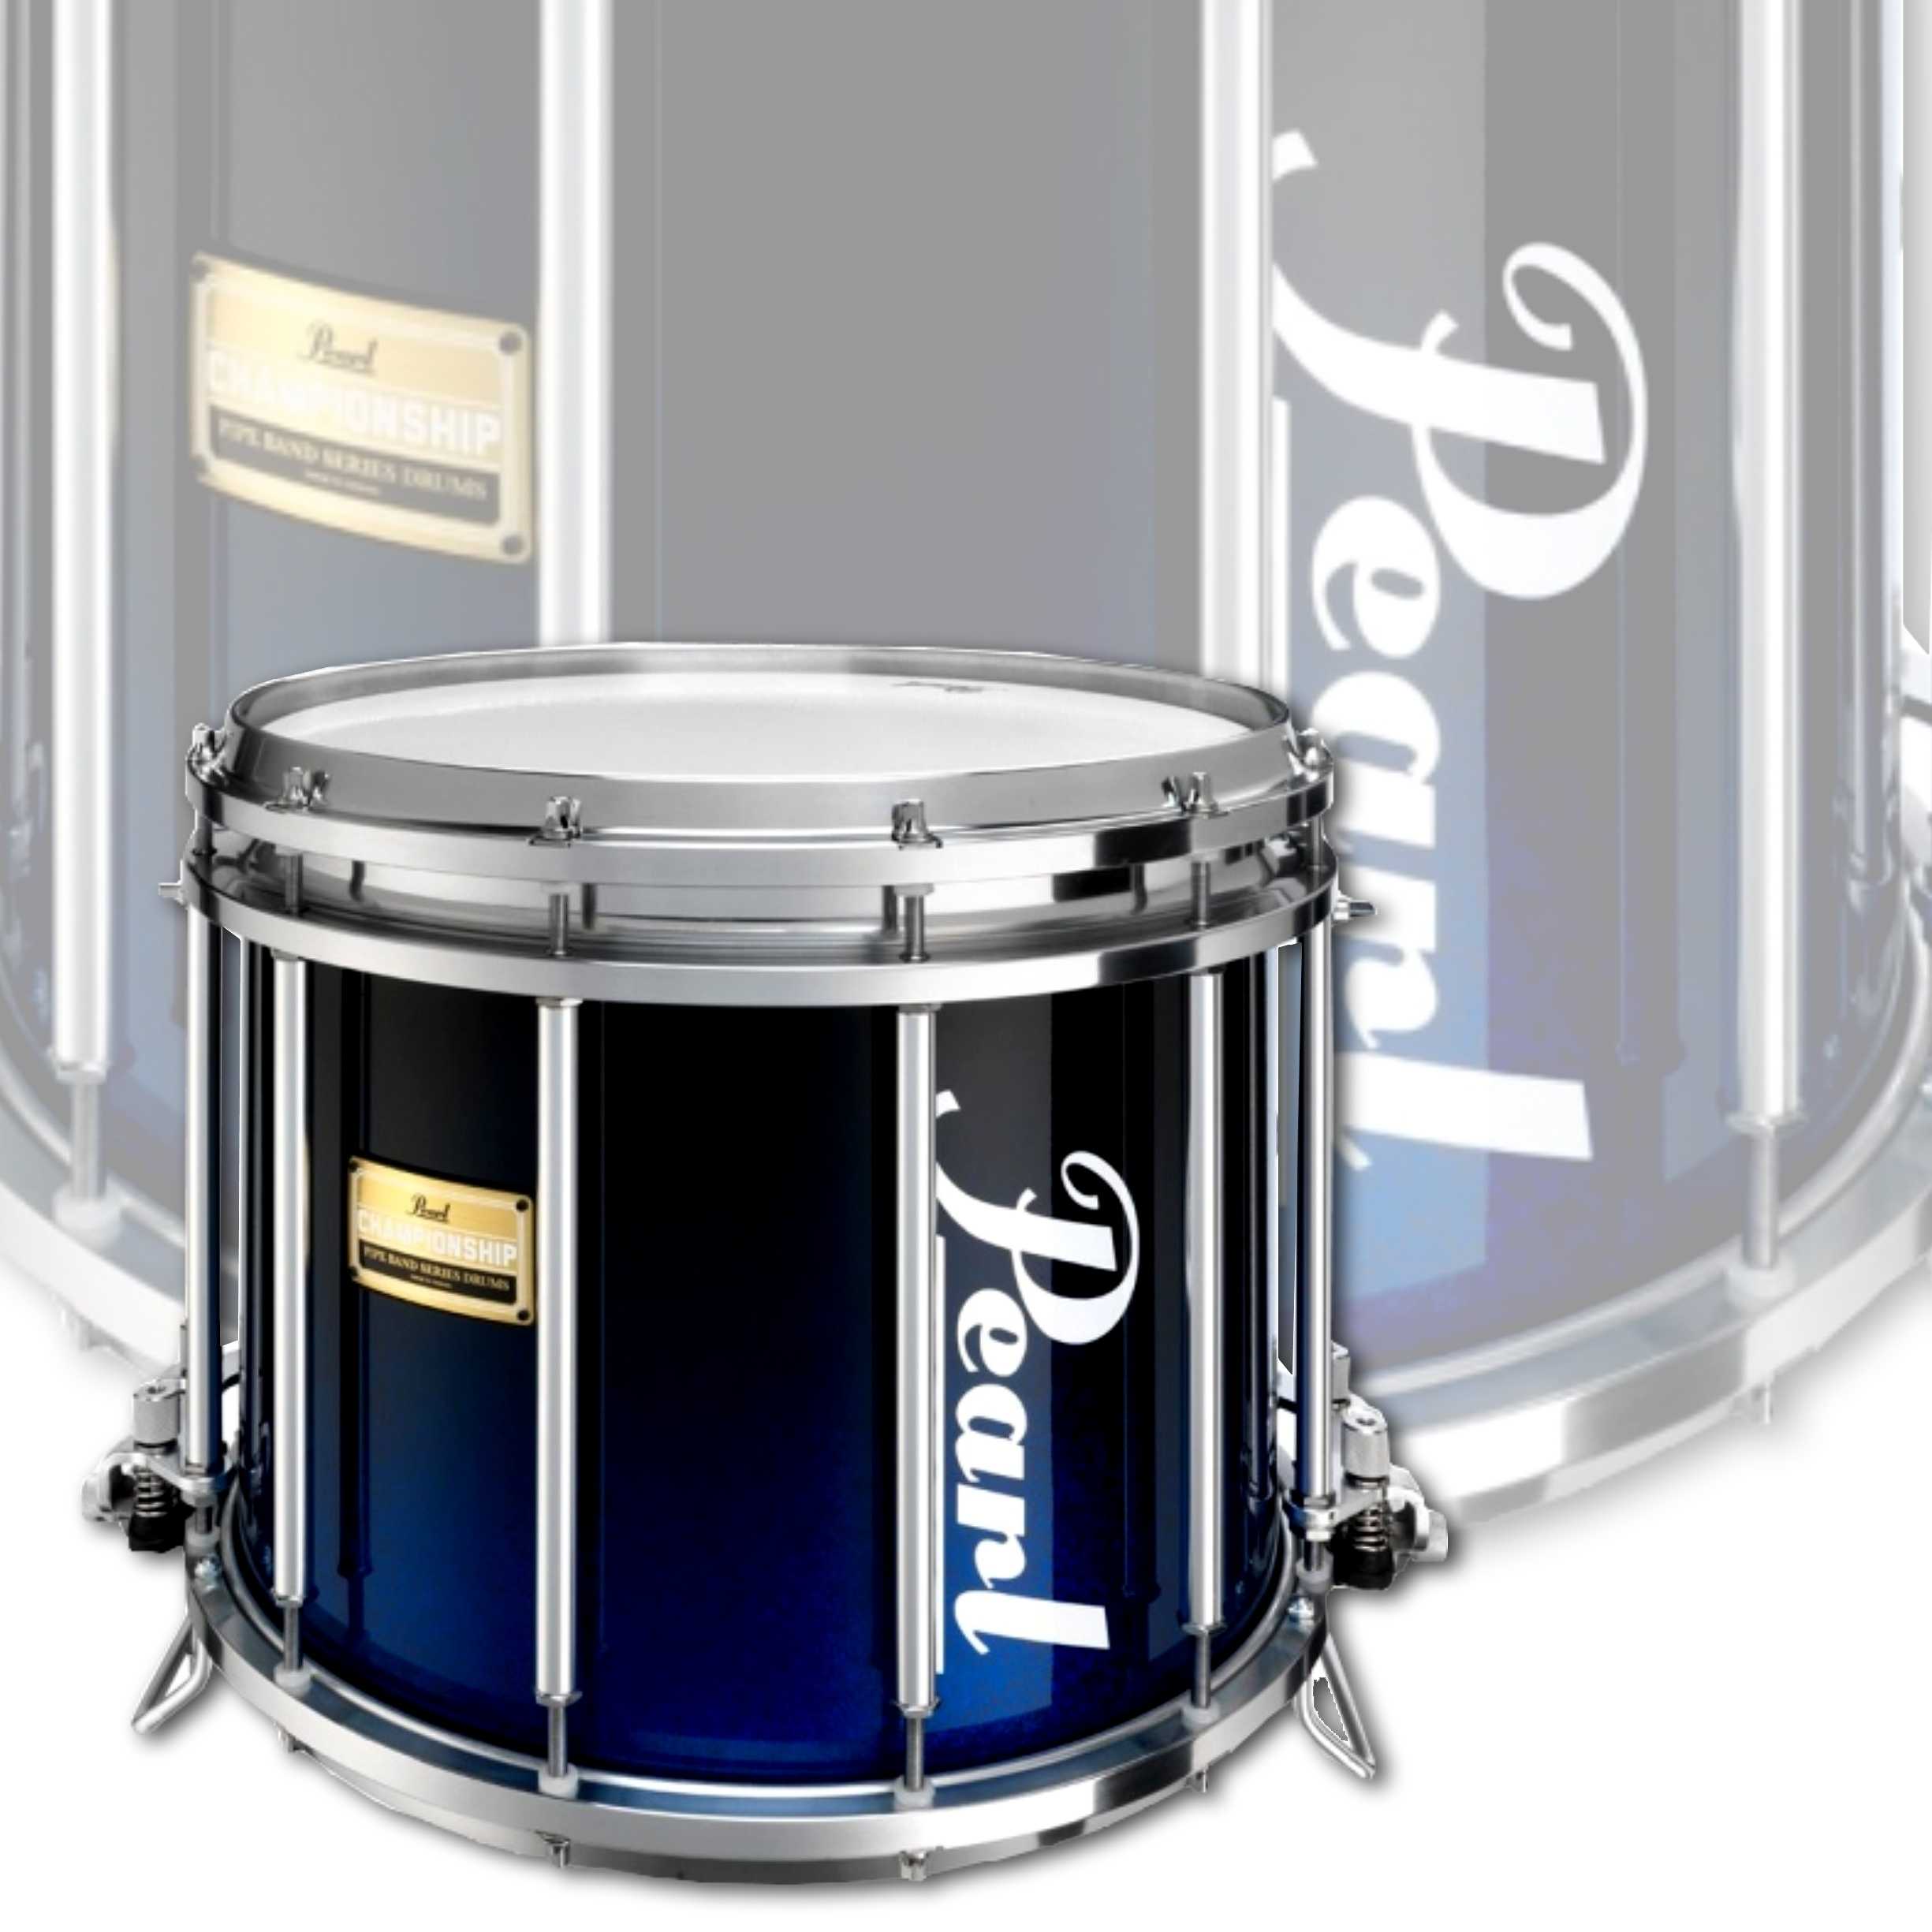 Pearl Pipe Band Medalist 14"x12" Marching Side Snare Drum 376 Ultra Blue Fade